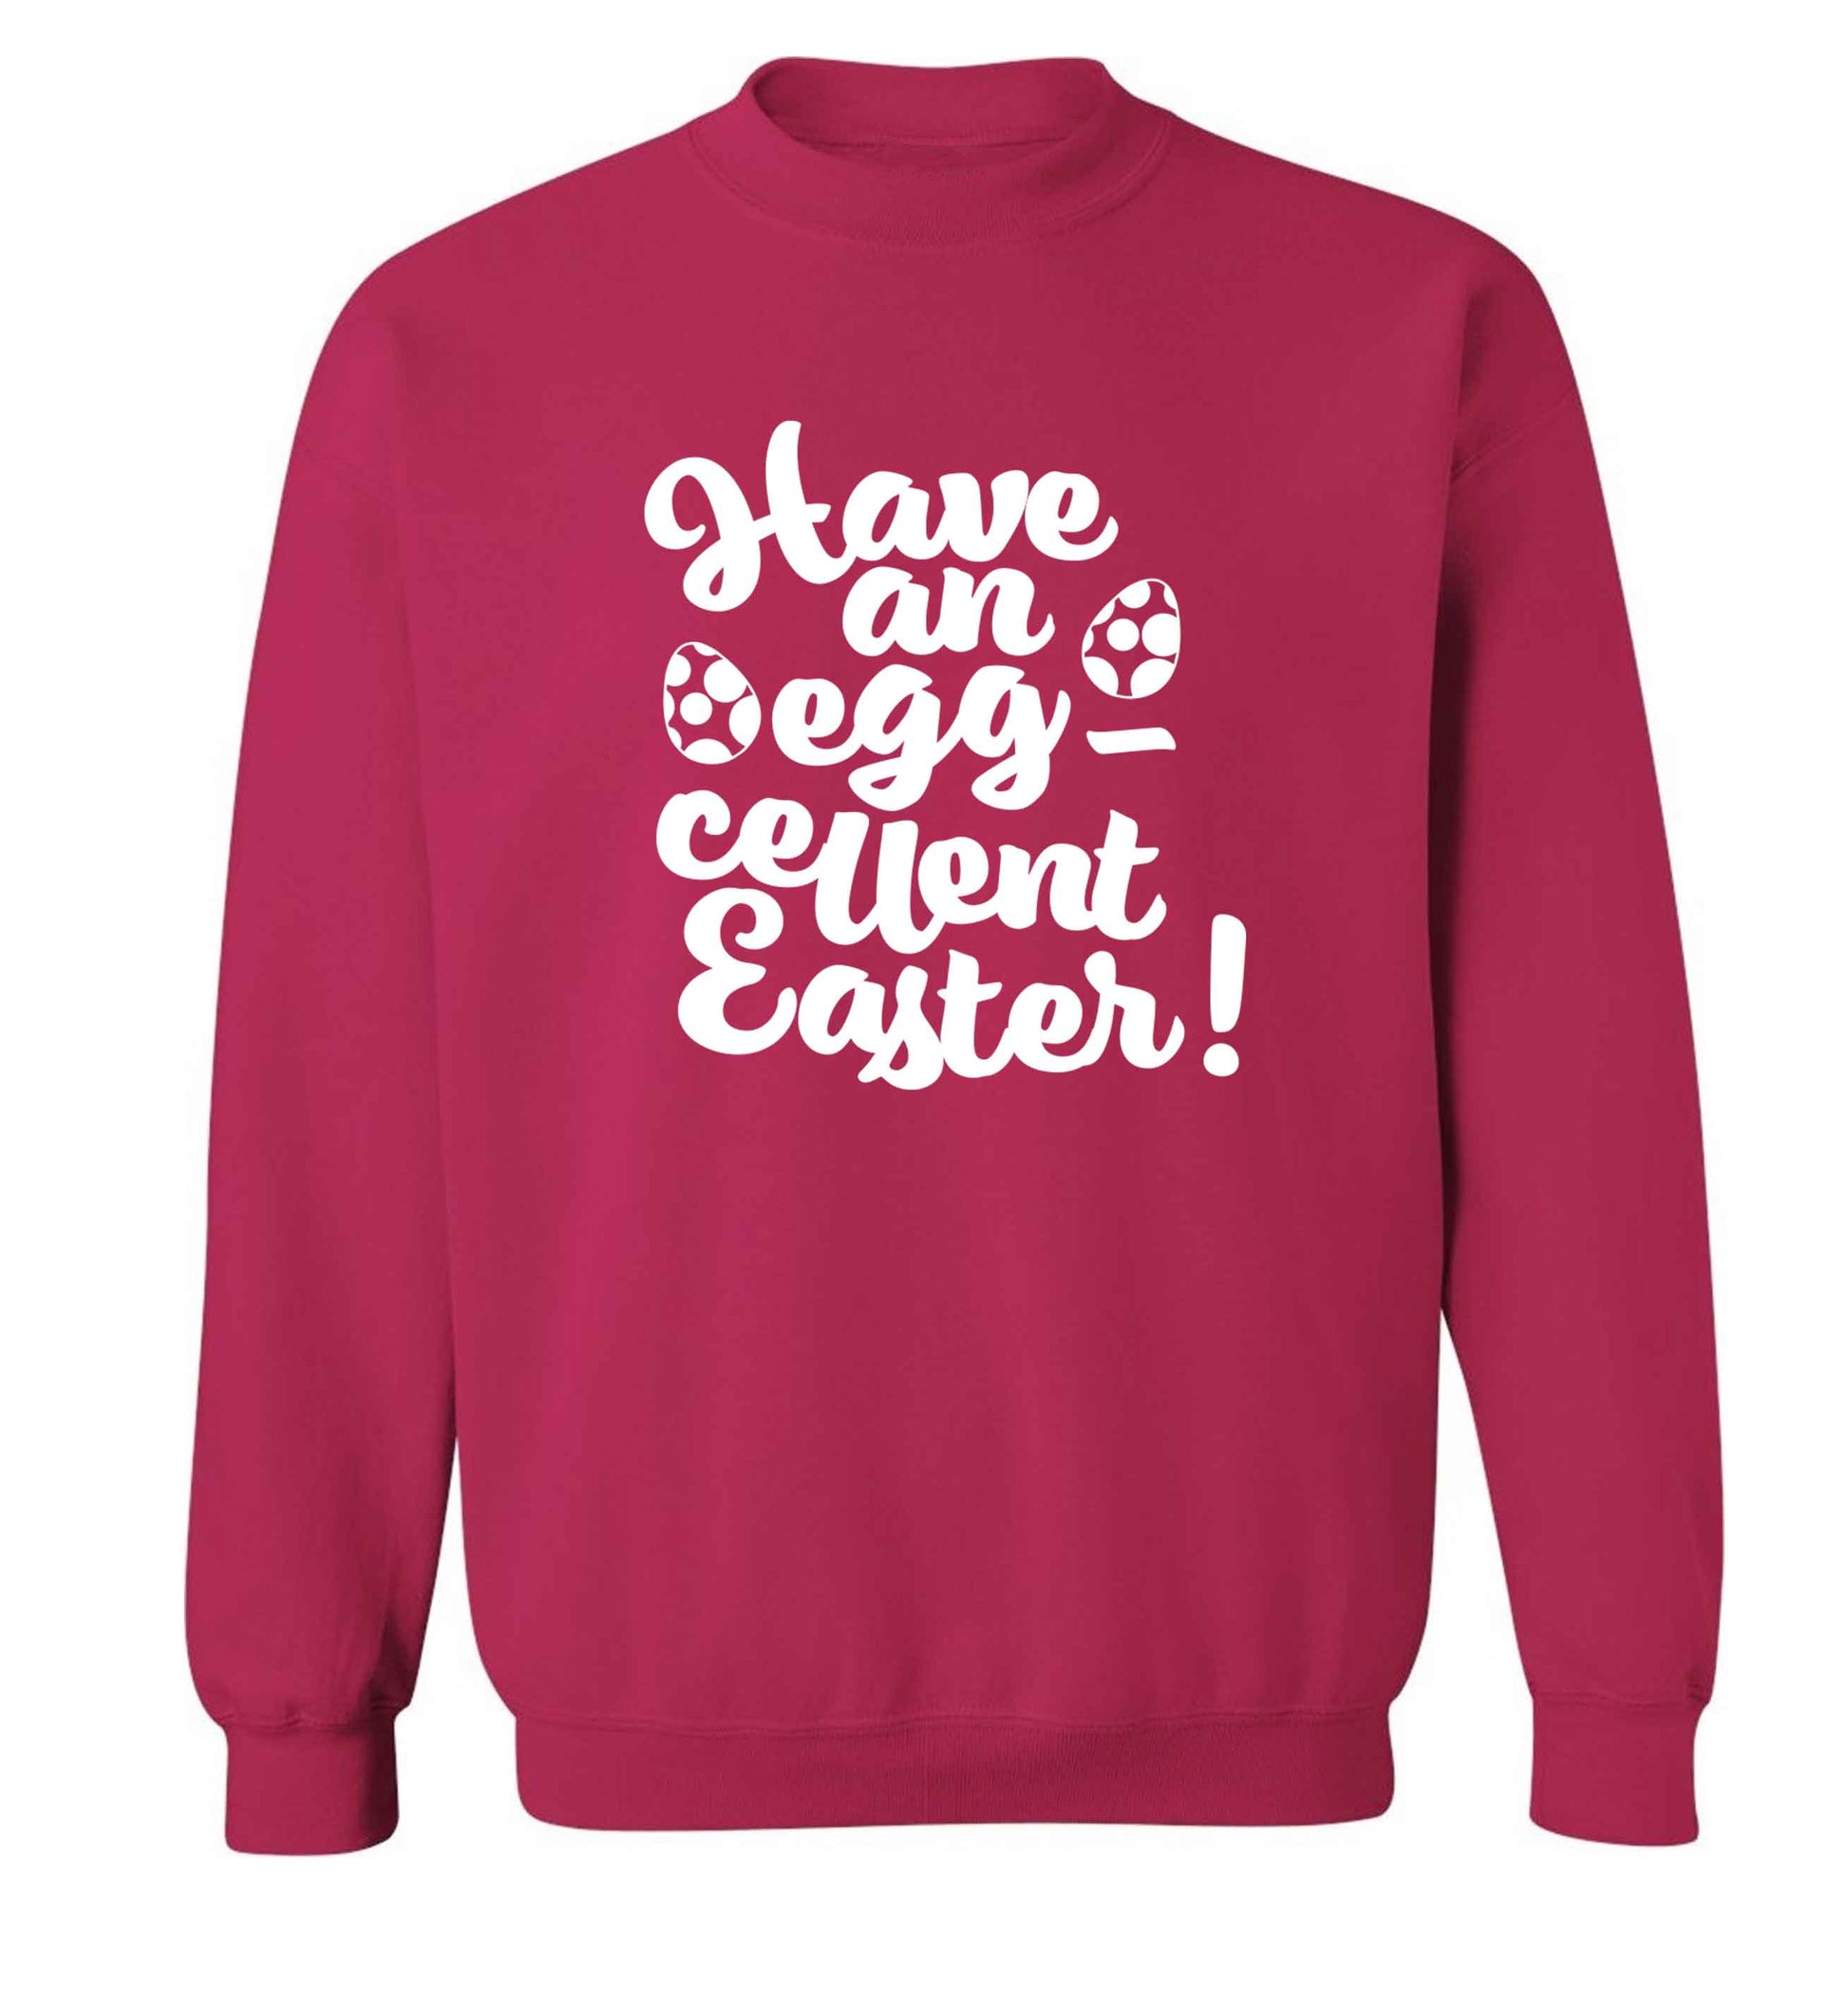 Have an eggcellent Easter adult's unisex pink sweater 2XL